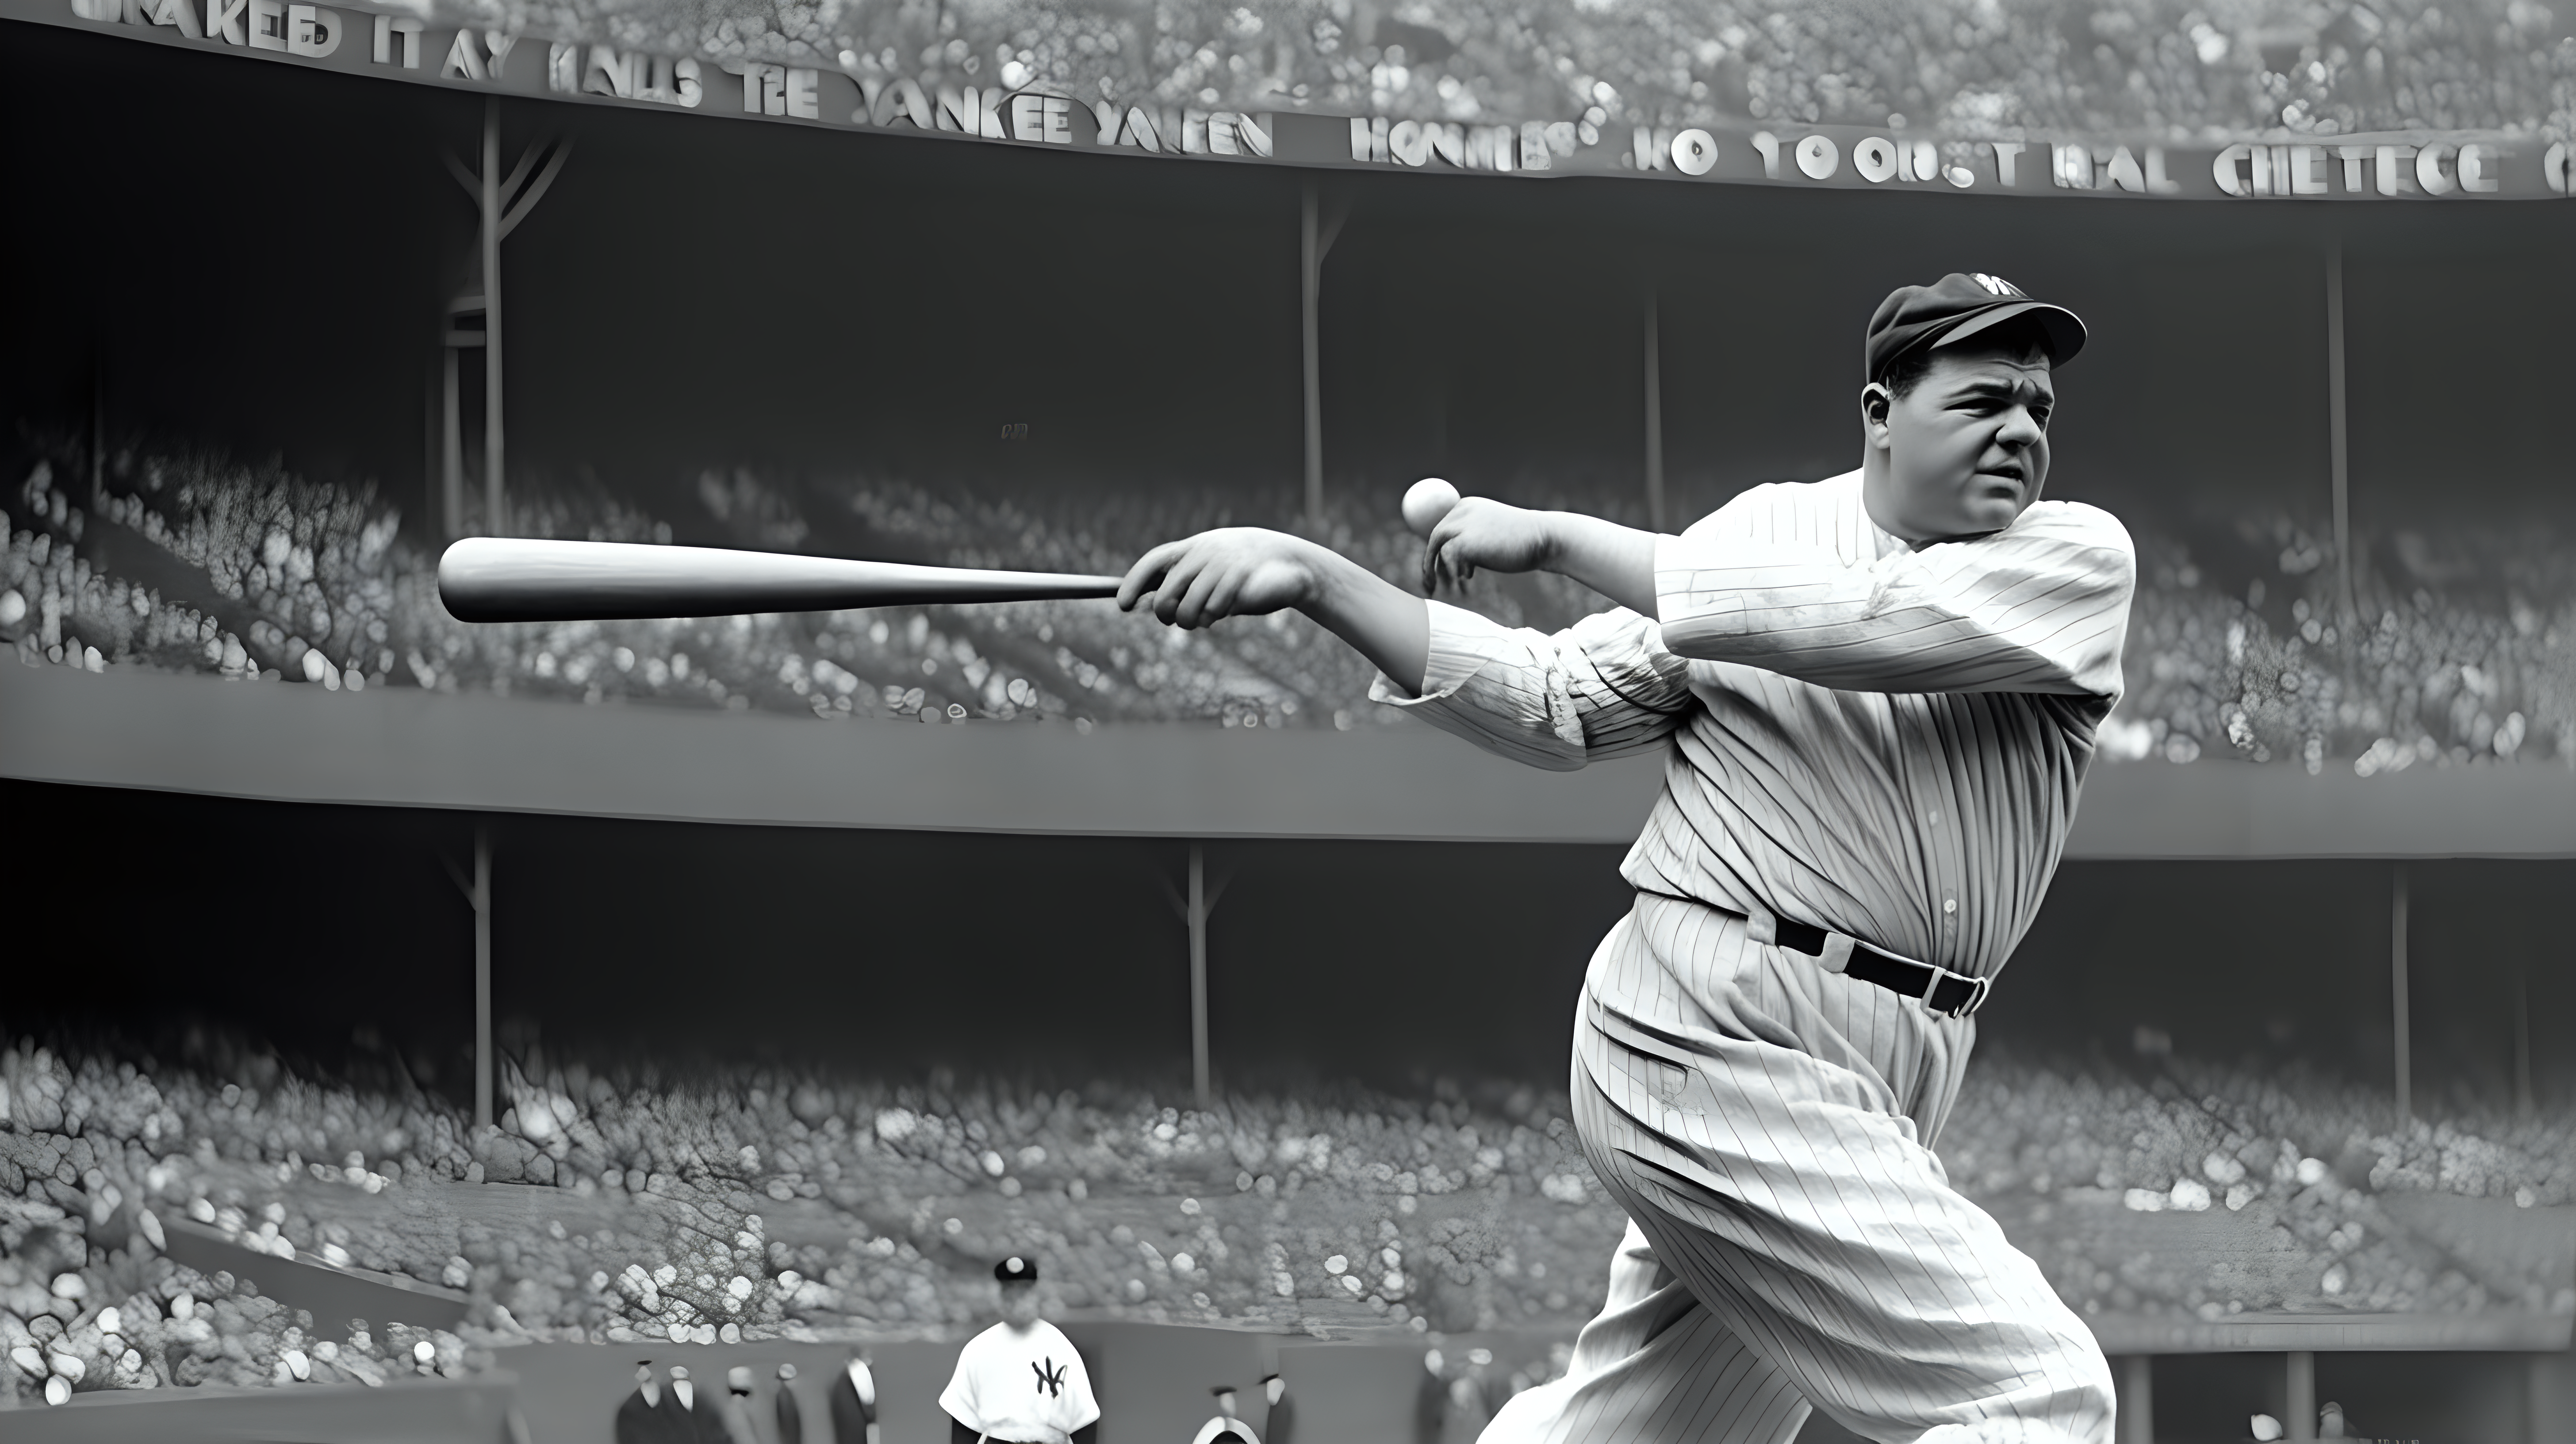 Babe Ruth hitting a ball out of Yankee